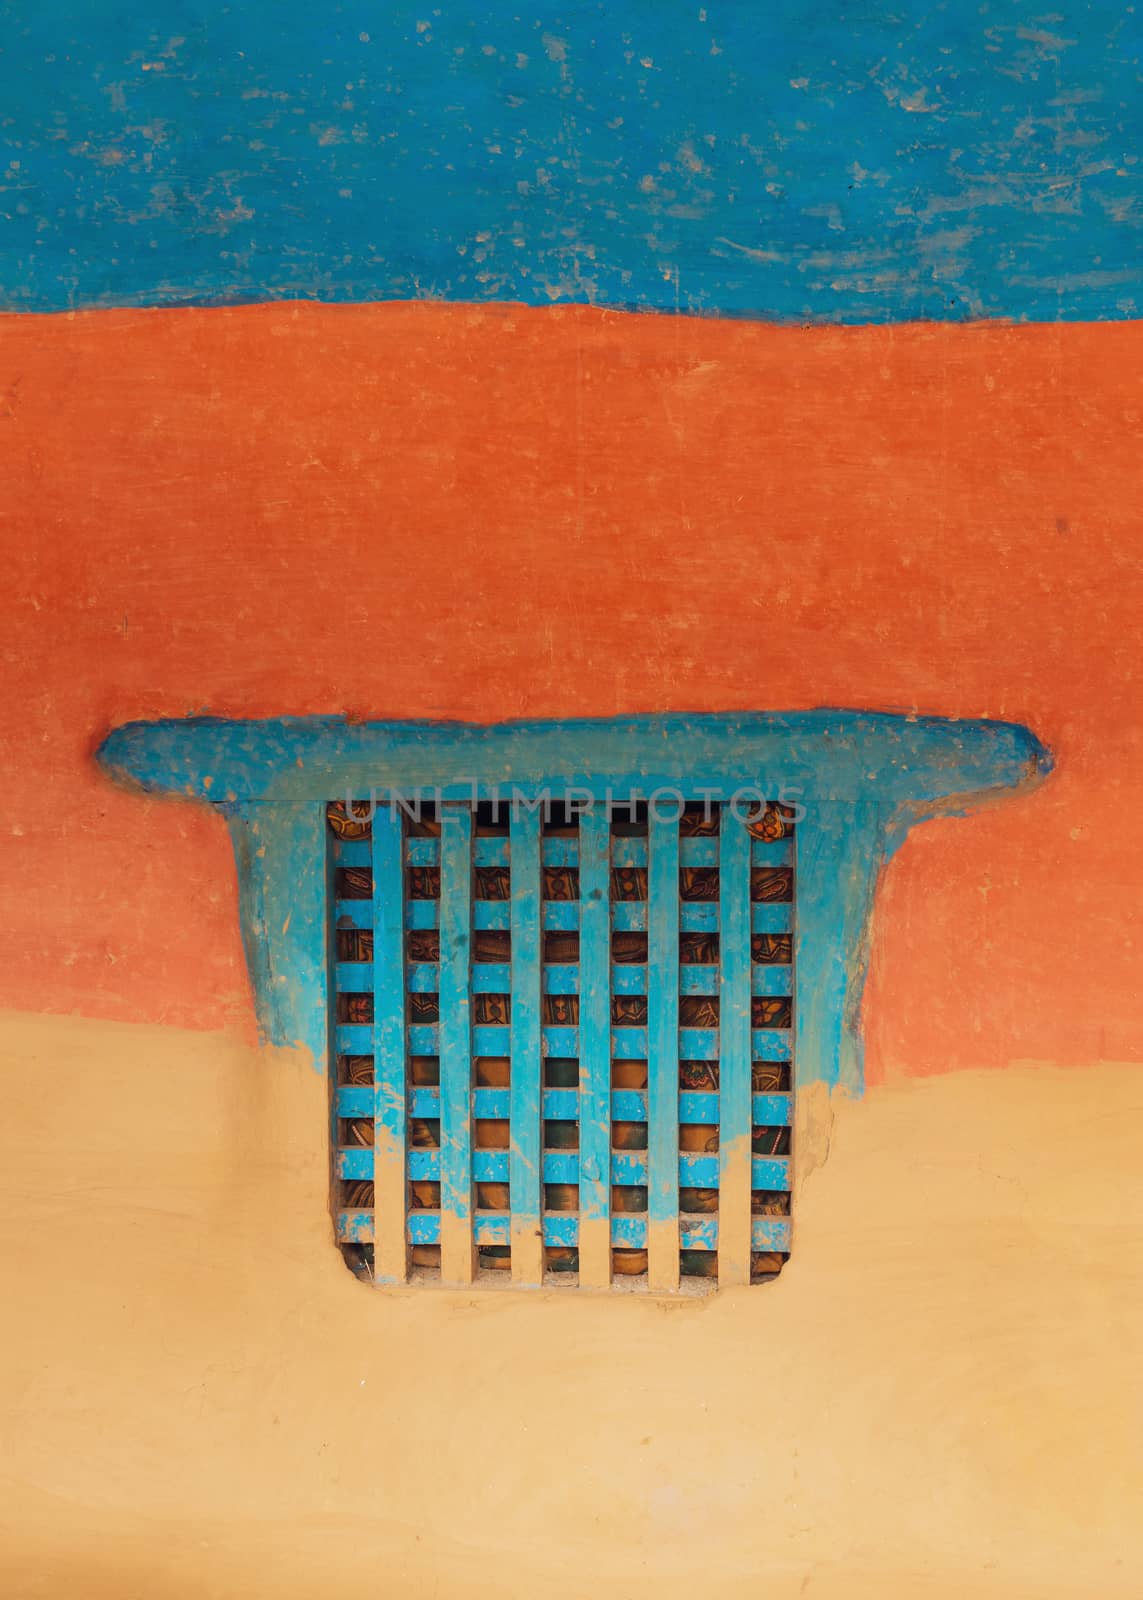 Traditional wooden Nepalese window called Ankhi jhyal. Painted blue on blue, orange and ocher mud wall.